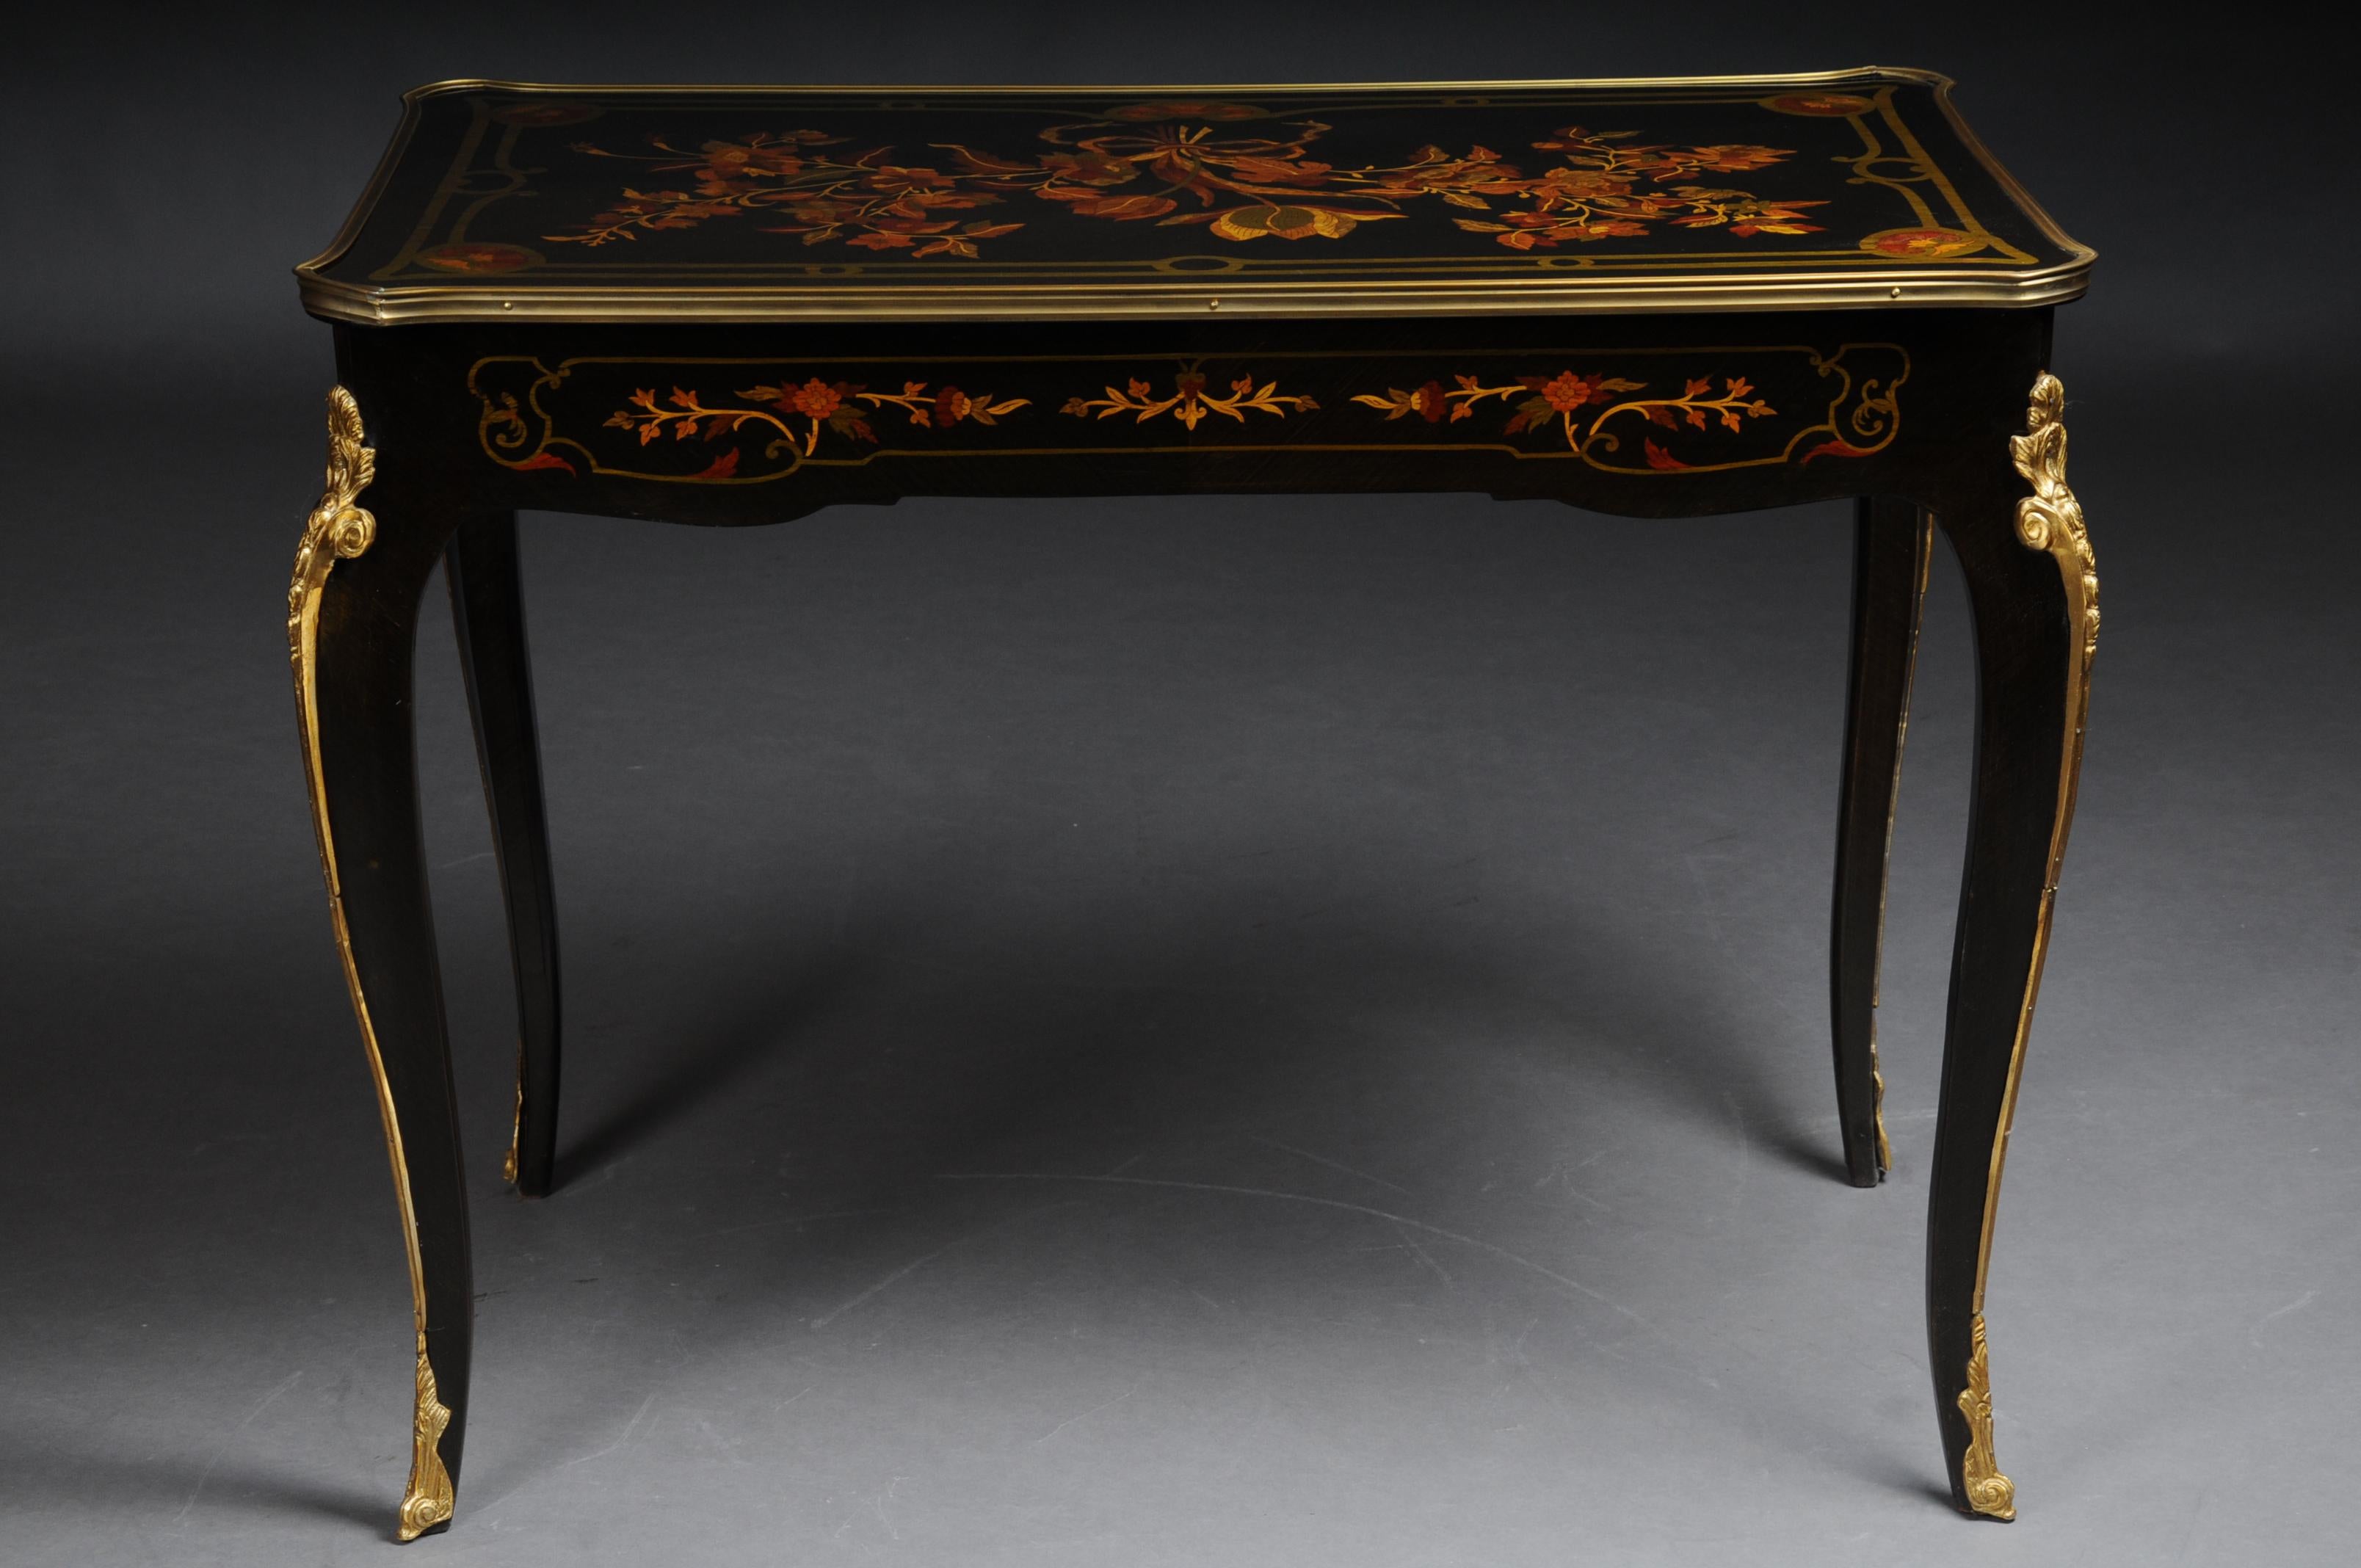 Noble ladies desk / table in Louis Quinze style, black

Inlays on solid softwood. Ending high, curved square legs in sabots. Slightly overhanging, framed in wide, matching profiles, tabletop with inset filigree maple inlays. Full-surface mirrored